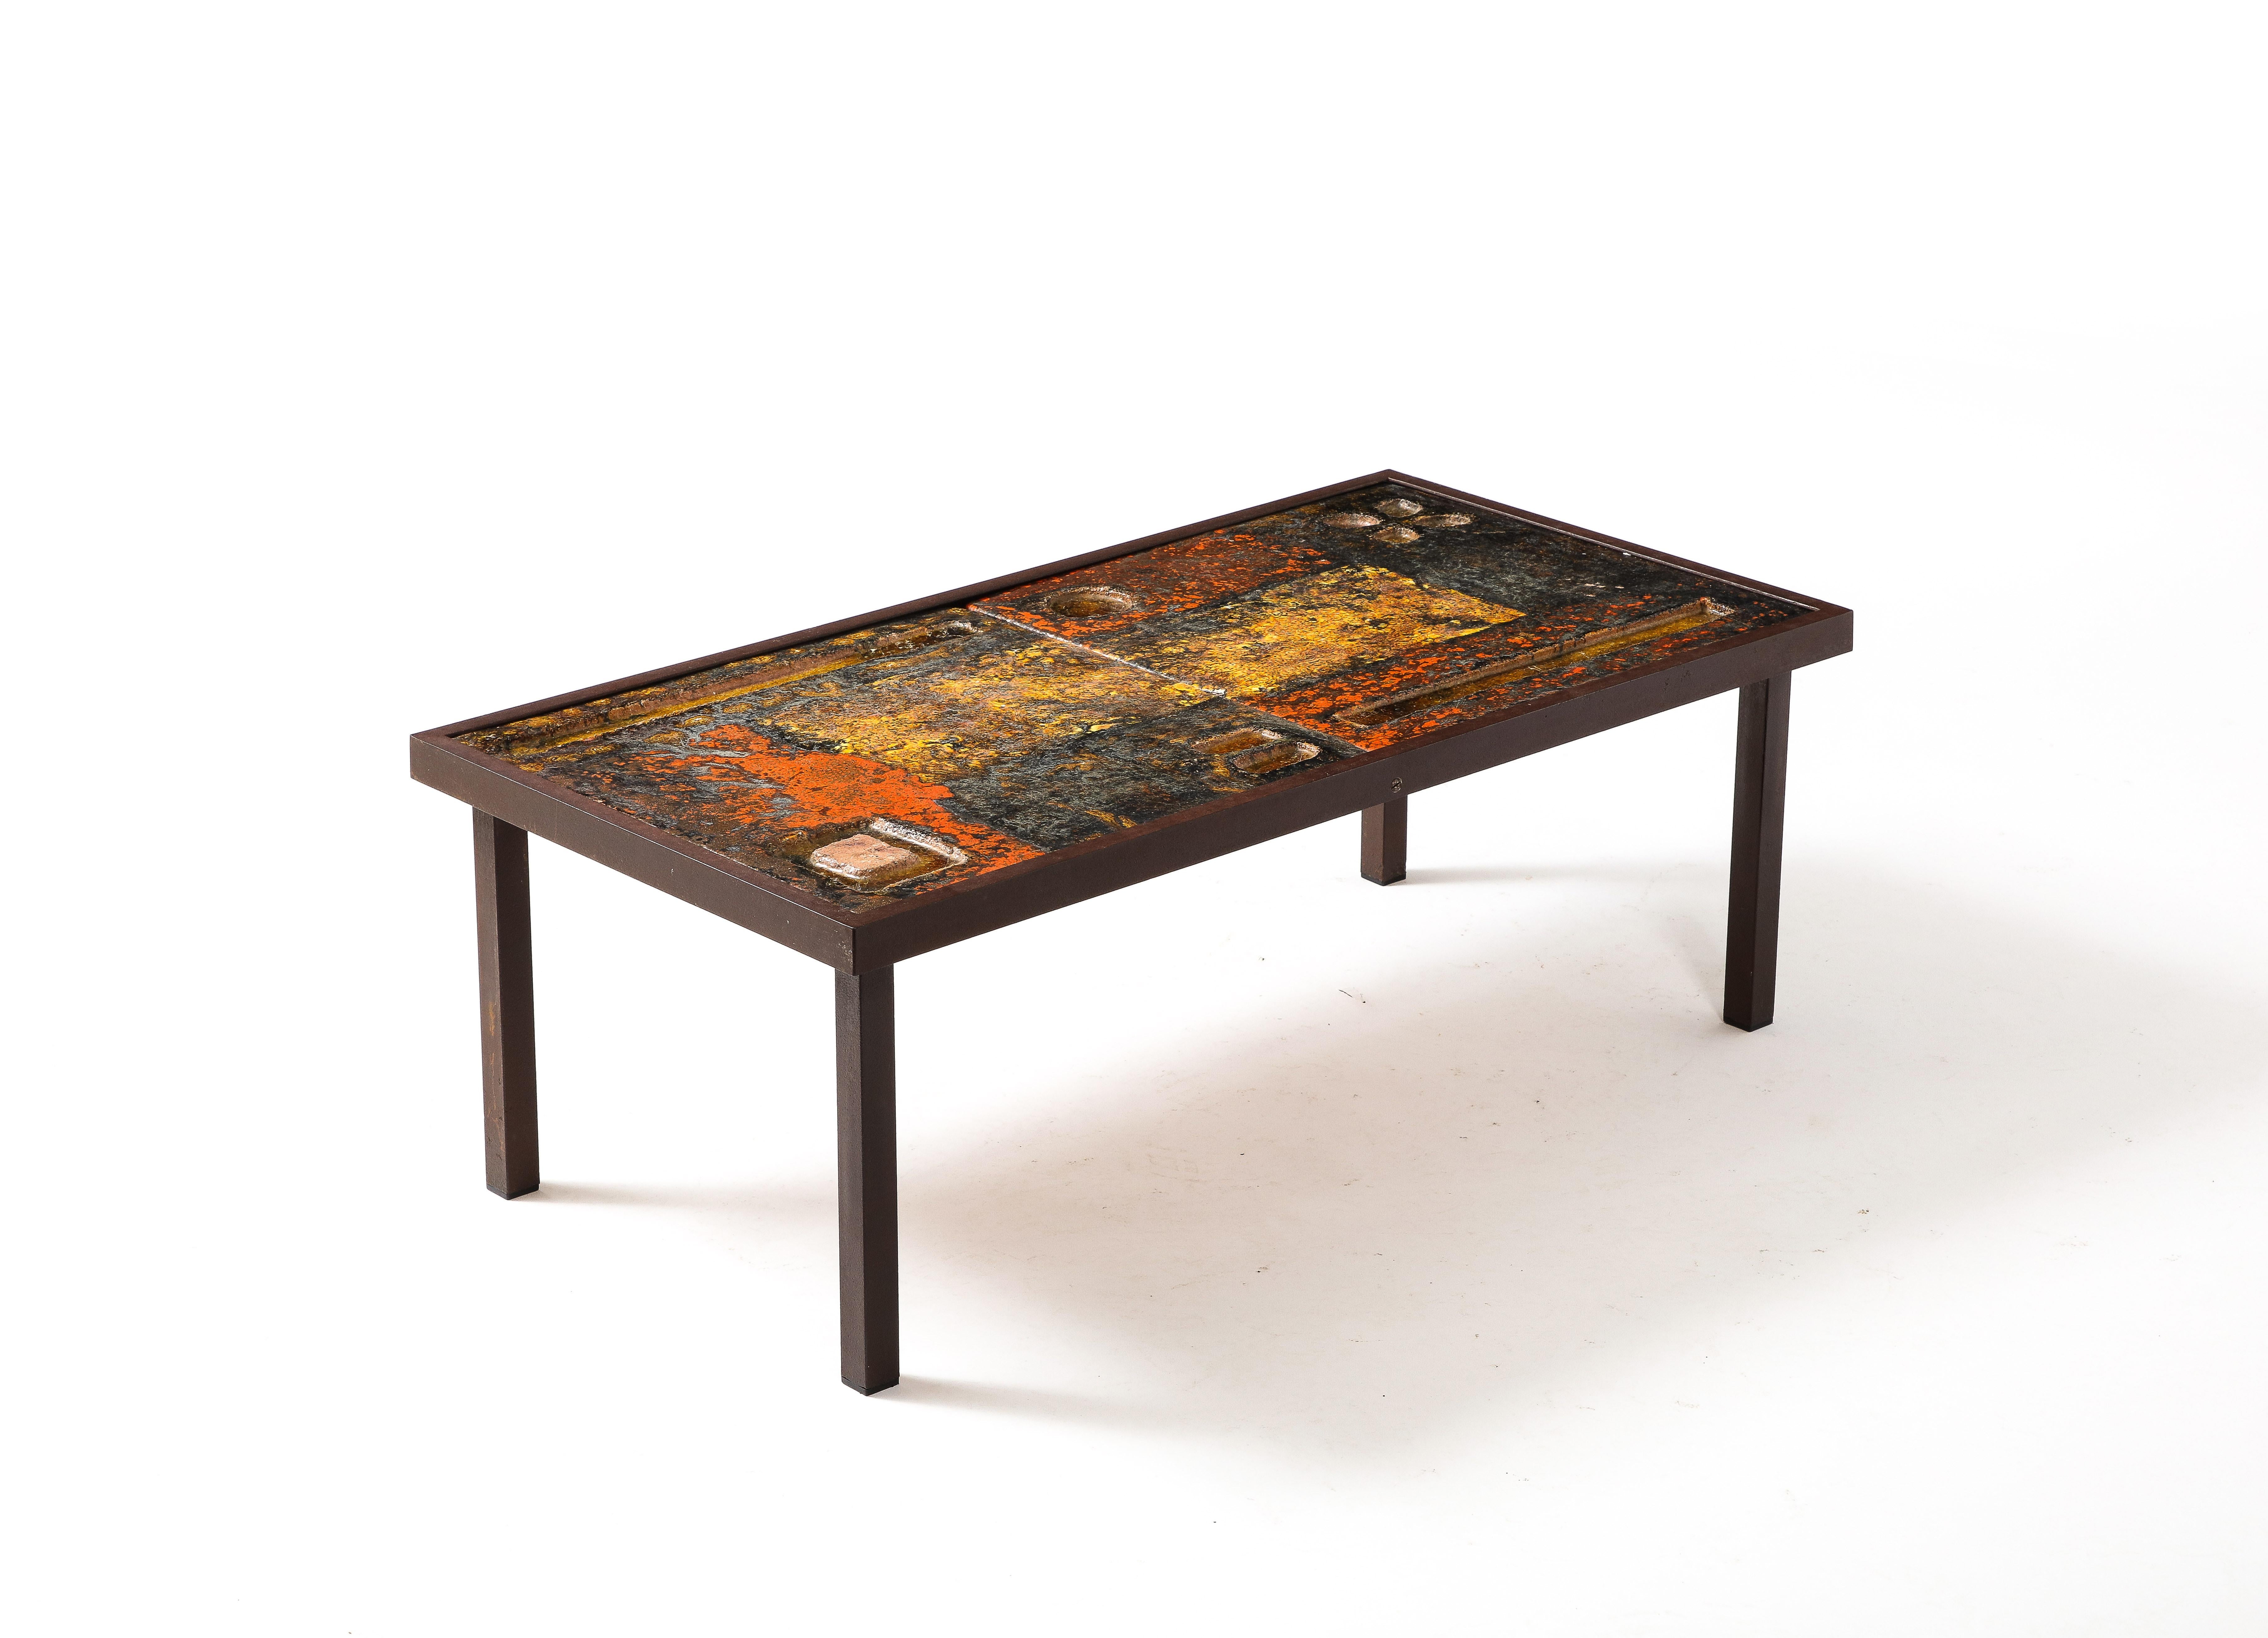 European Cloutiers Freres Lava Tiles Coffee Table, France 1960s For Sale